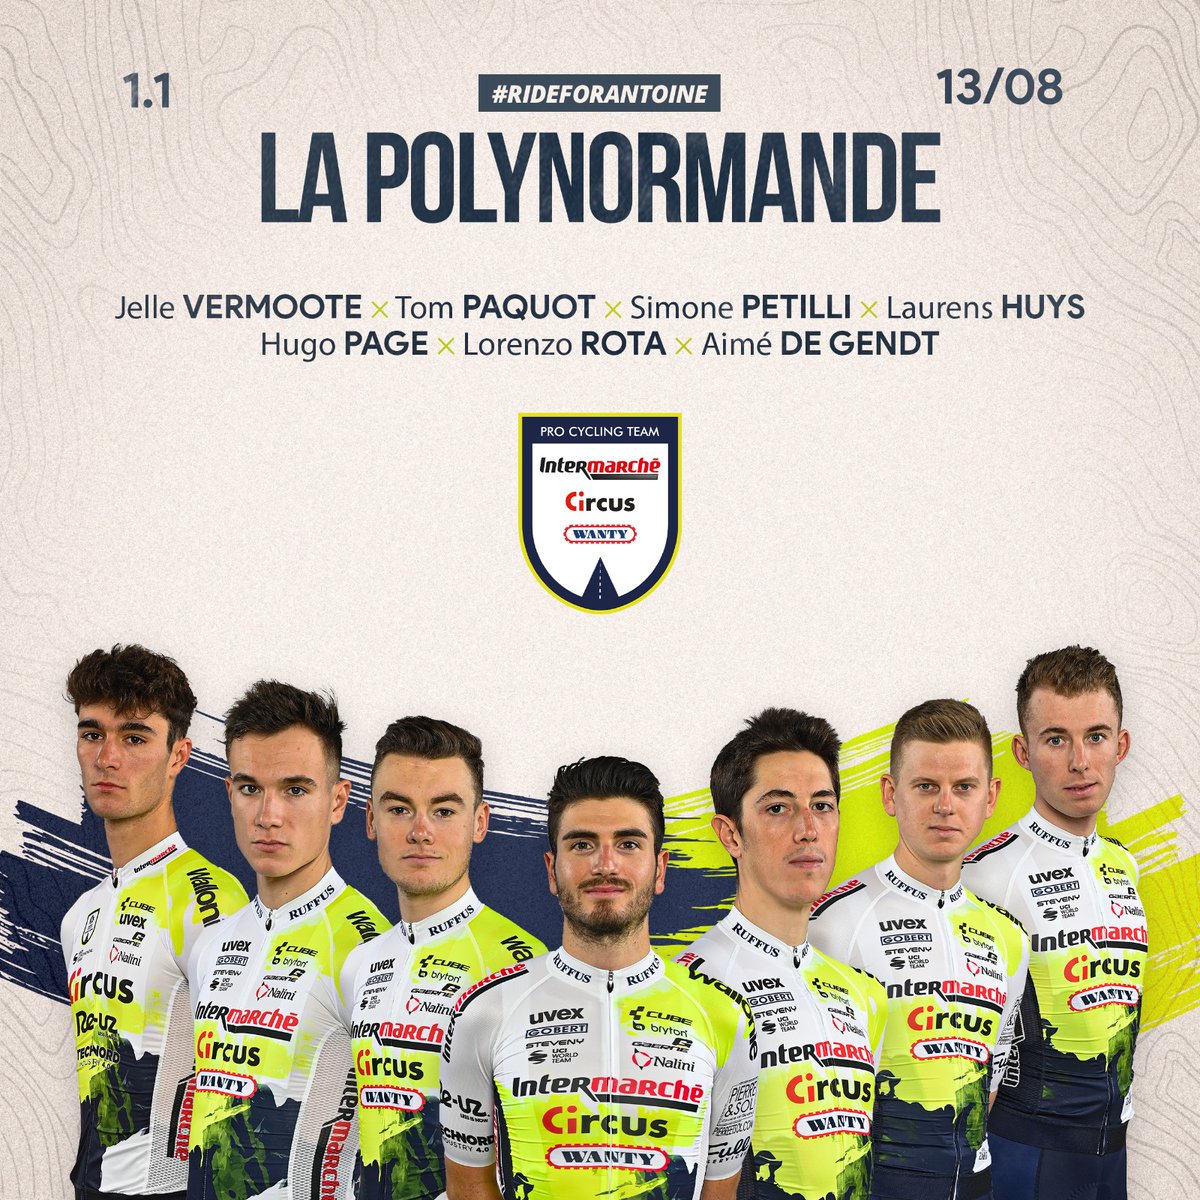 We bring an exciting team for La Polynormande this Sunday 🔥 

🇧🇪 Aimé De Gendt
🇧🇪 Laurens Huys
🇫🇷 Hugo Page
🇧🇪 Tom Paquot
🇮🇹 Simone Petilli
🇮🇹 Lorenzo Rota
🇧🇪 Jelle Vermoote